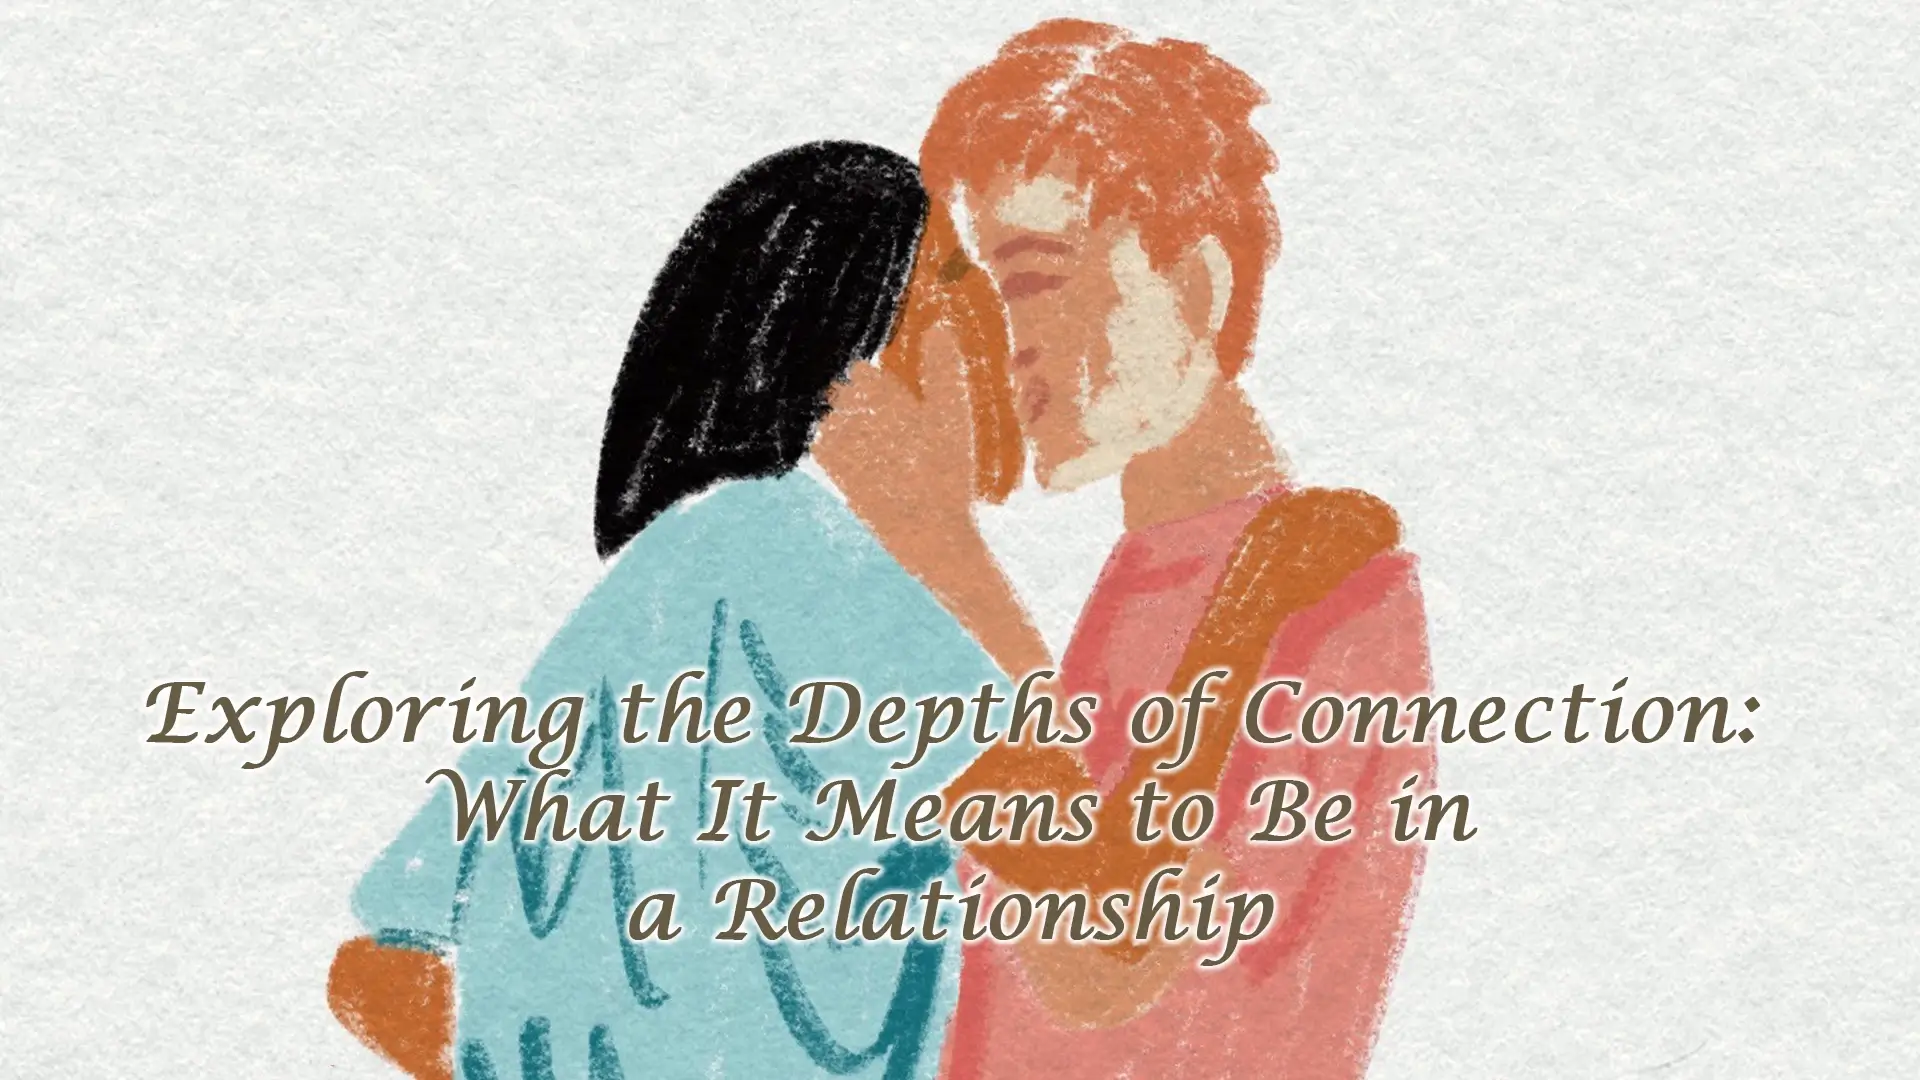 Exploring the Depths of Connection: What It Means to Be in a Relationship